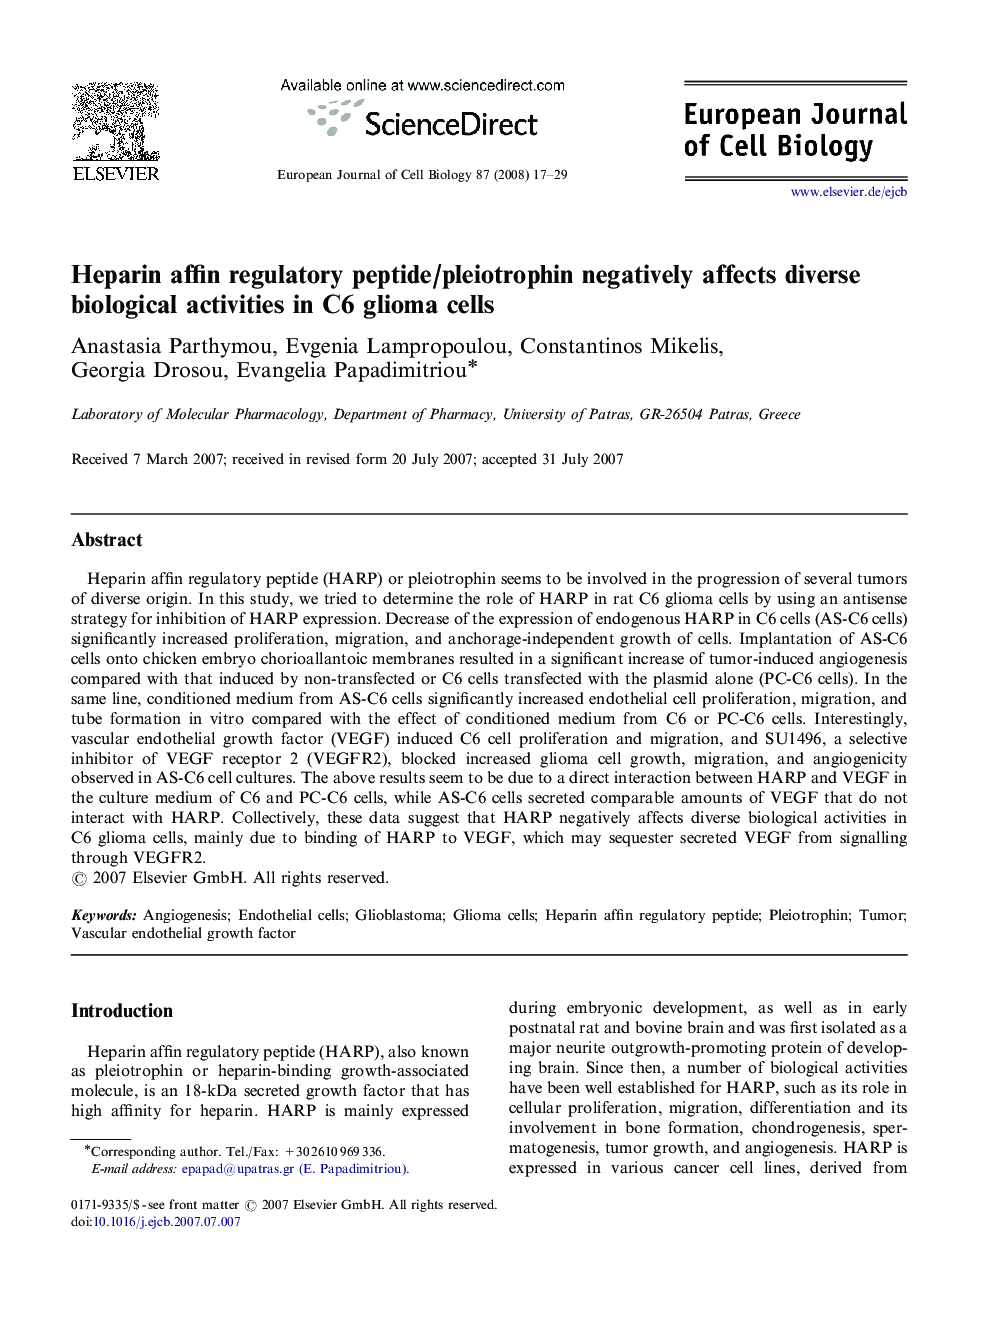 Heparin affin regulatory peptide/pleiotrophin negatively affects diverse biological activities in C6 glioma cells